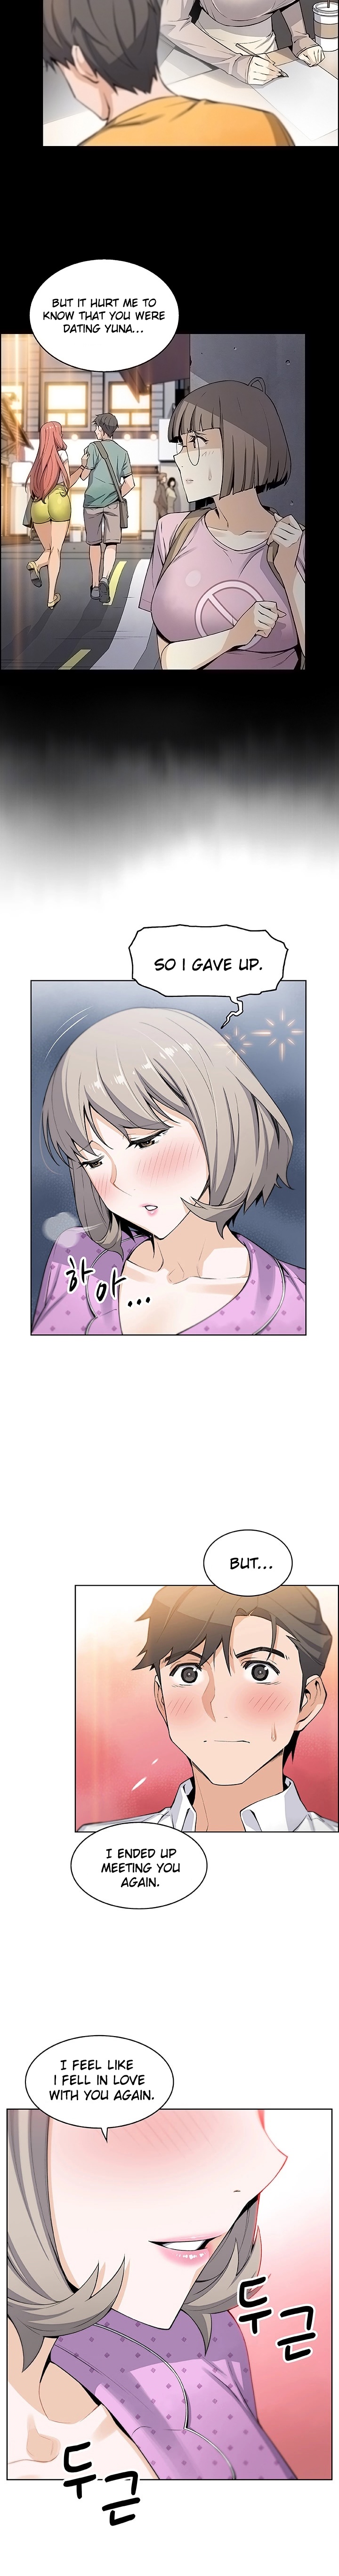 Housekeeper Manhwa - Chapter 17 Page 2